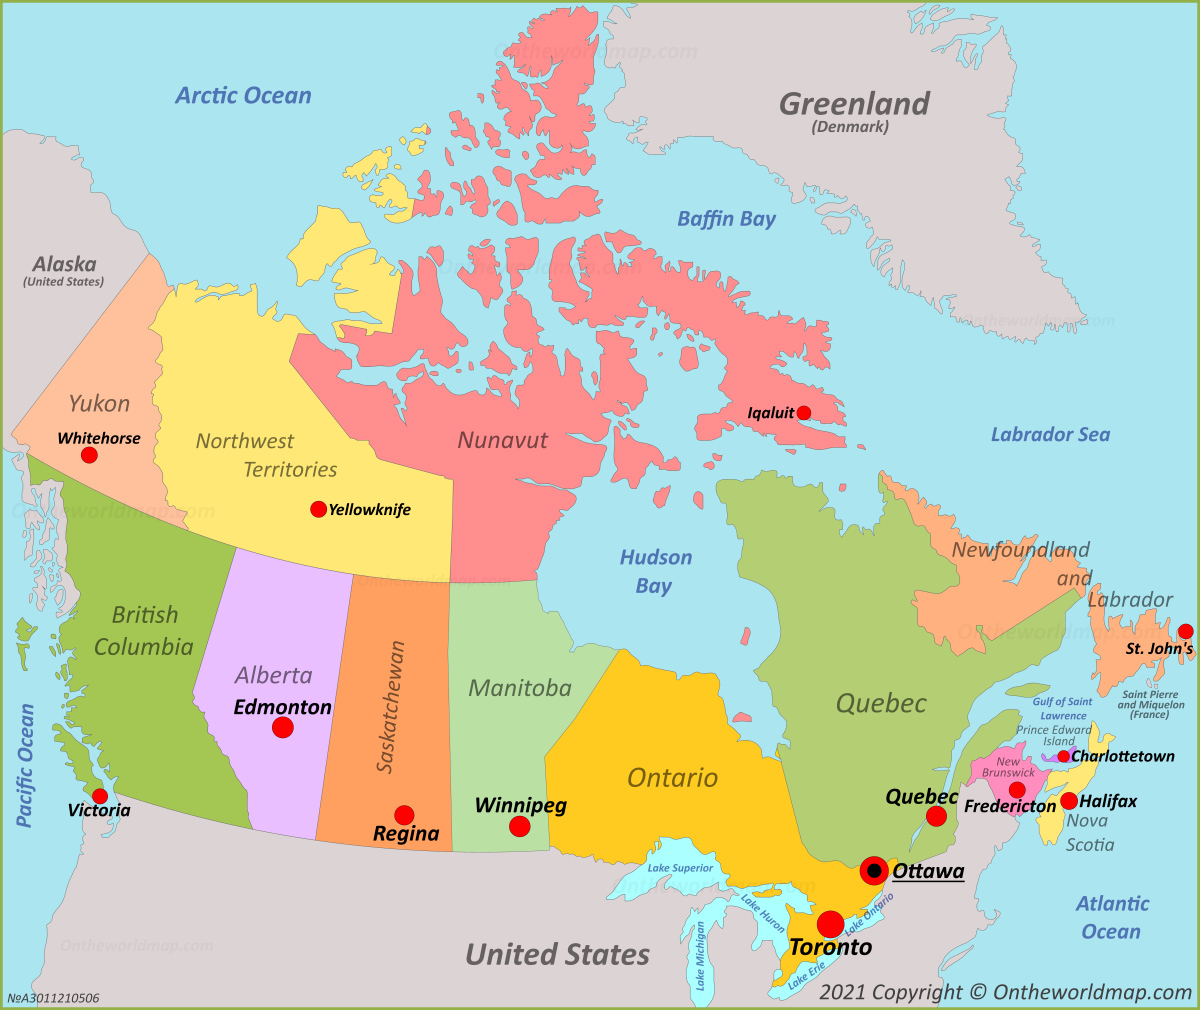 Albums 93+ Images map of canadian provinces and territories and capitals Stunning